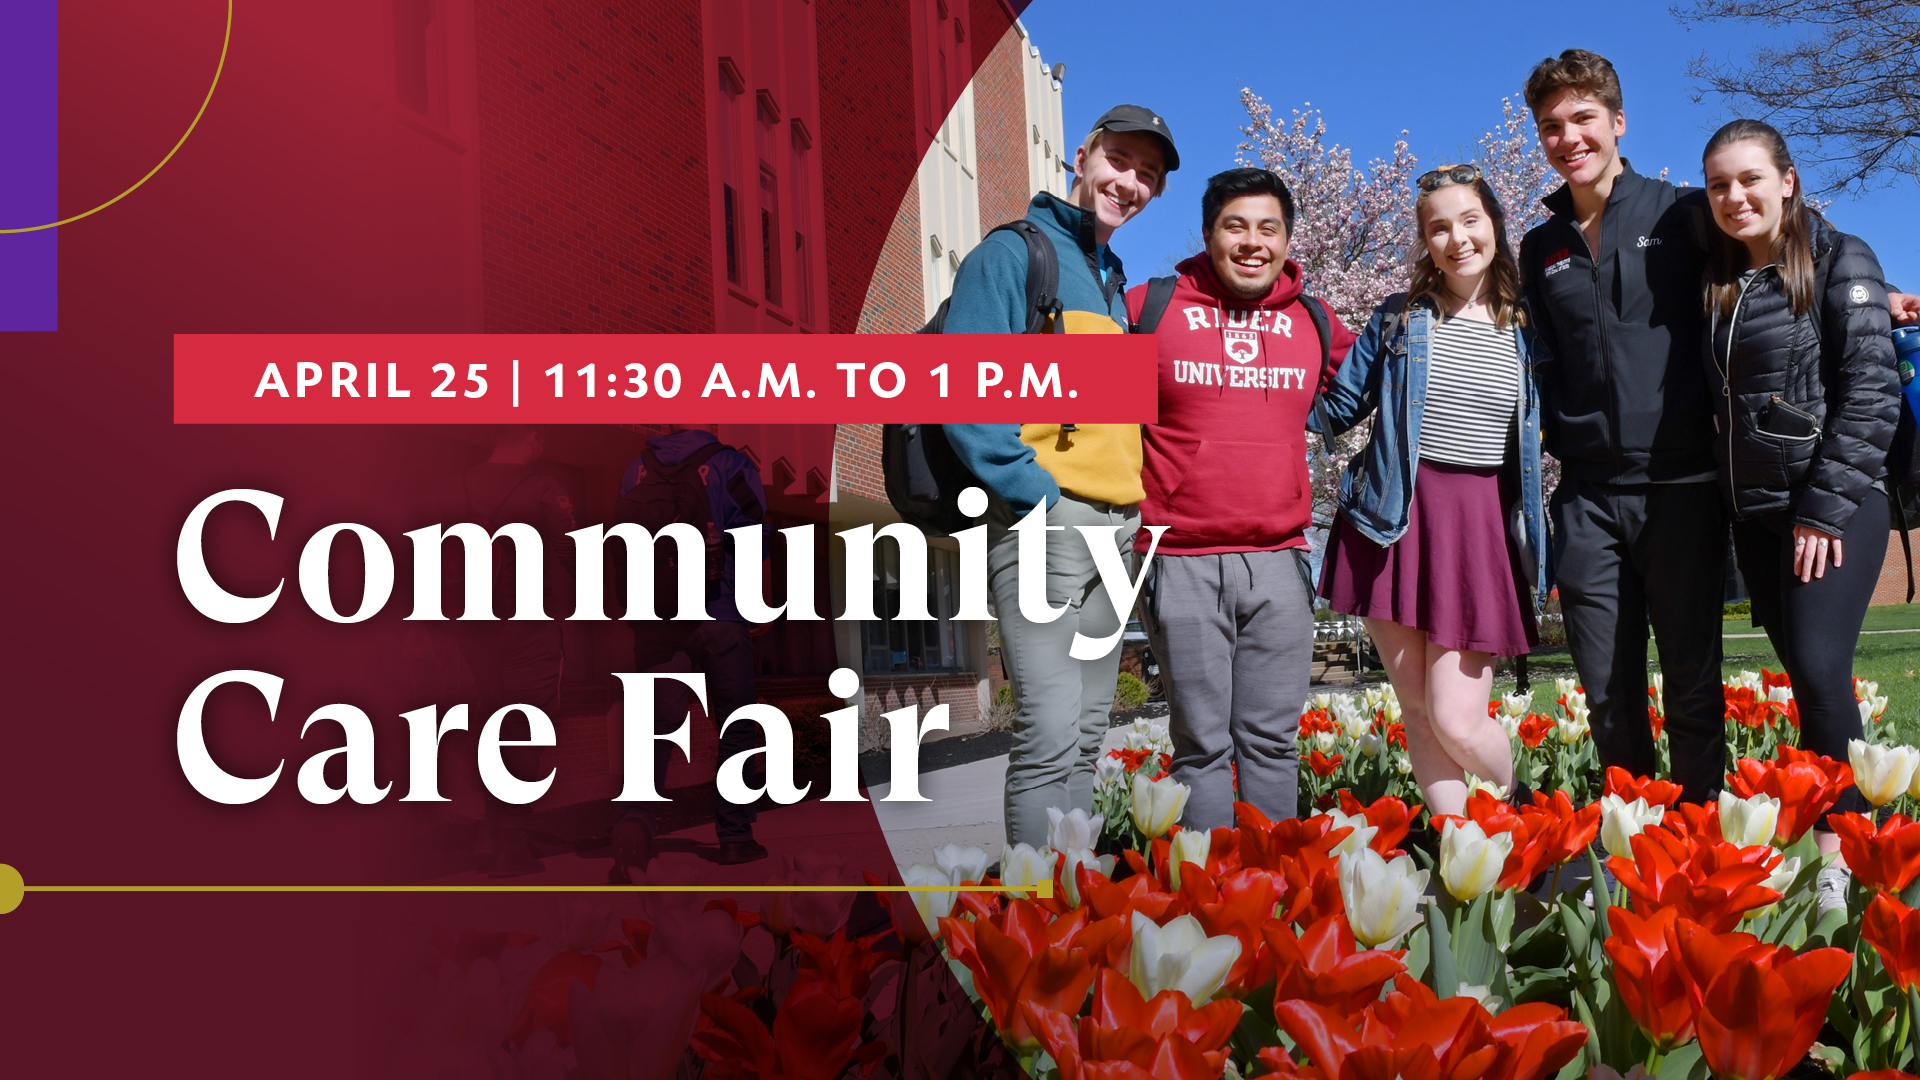 Community Care Fair students on campus